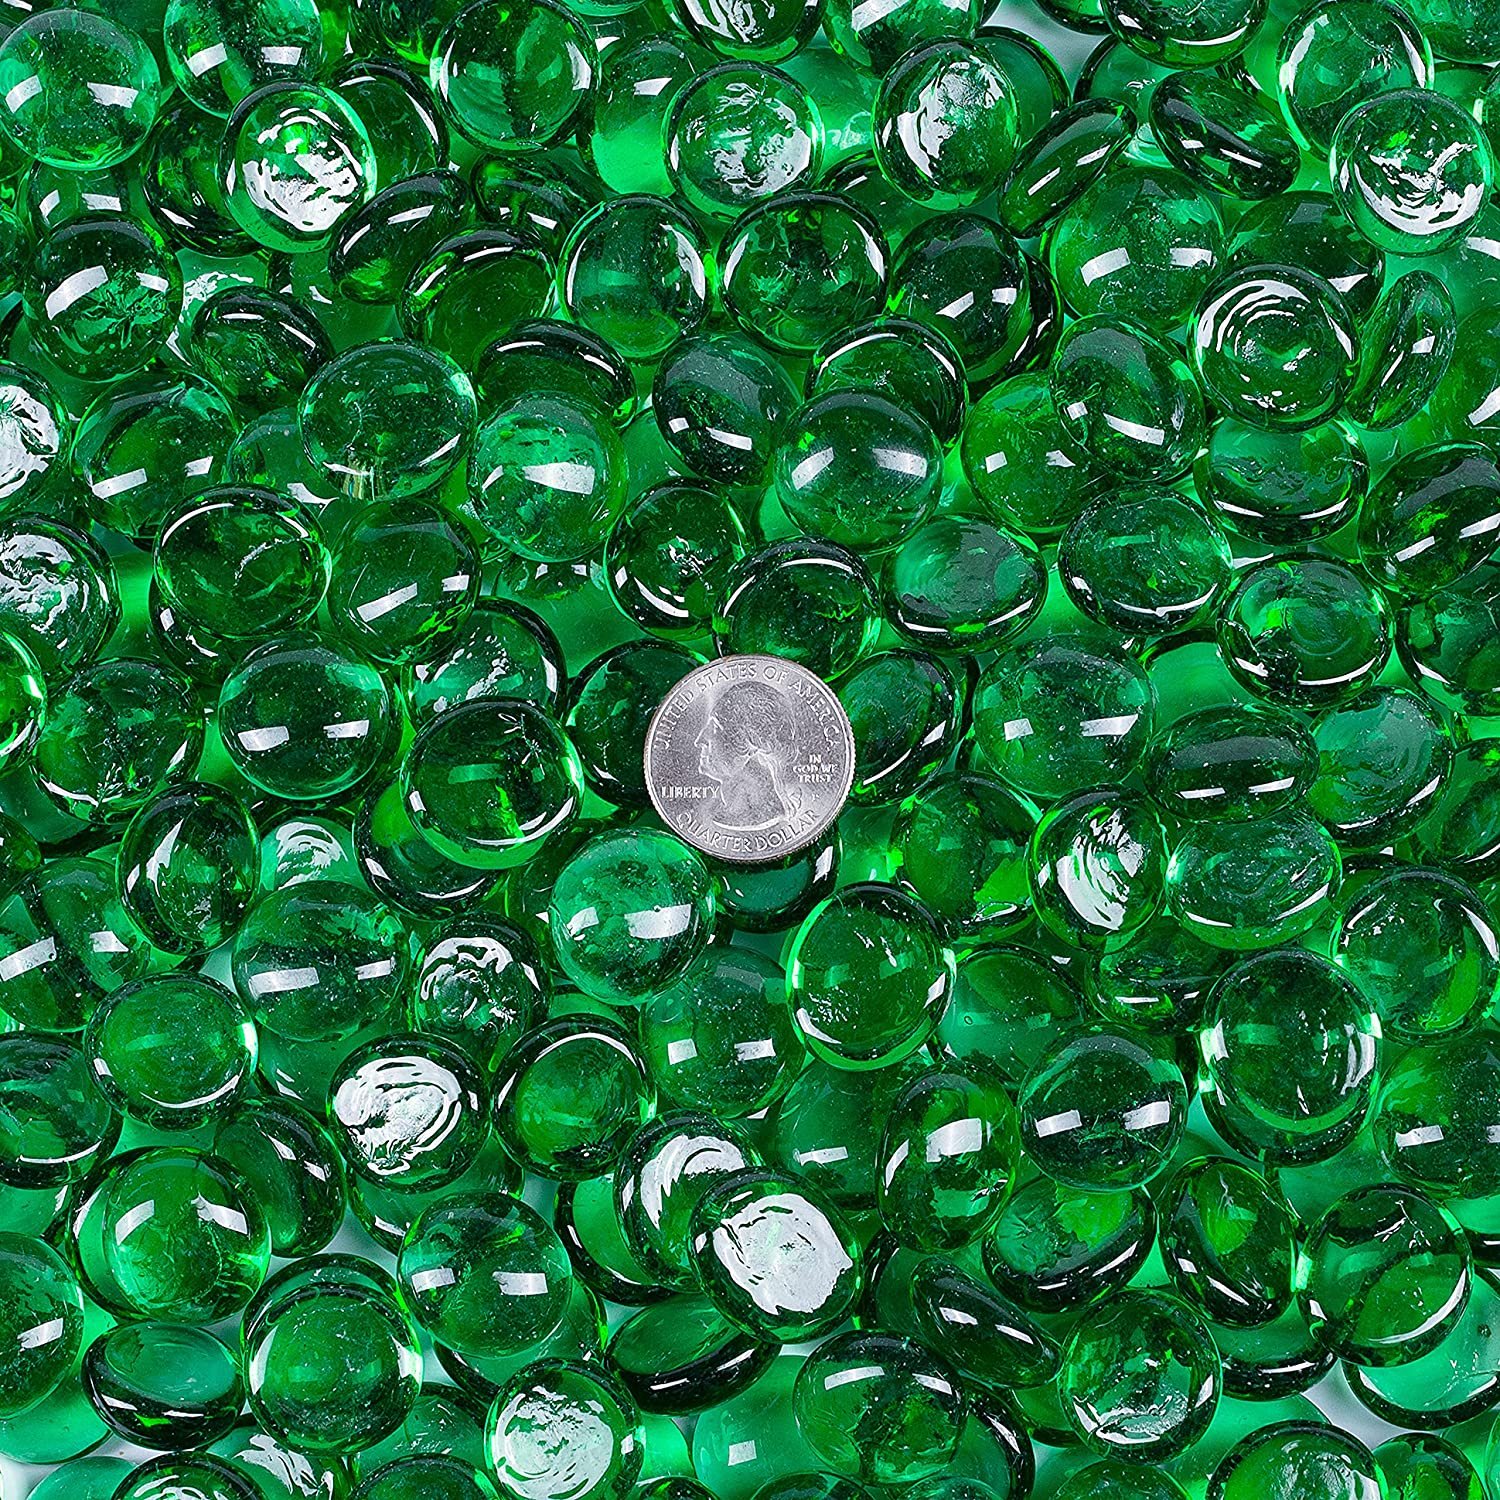 Galashield Green Flat Glass Marbles for Vases Glass Gems Beads Pebbles Vase Filler 5 LBS, Approx. 450 PCS - image 4 of 6